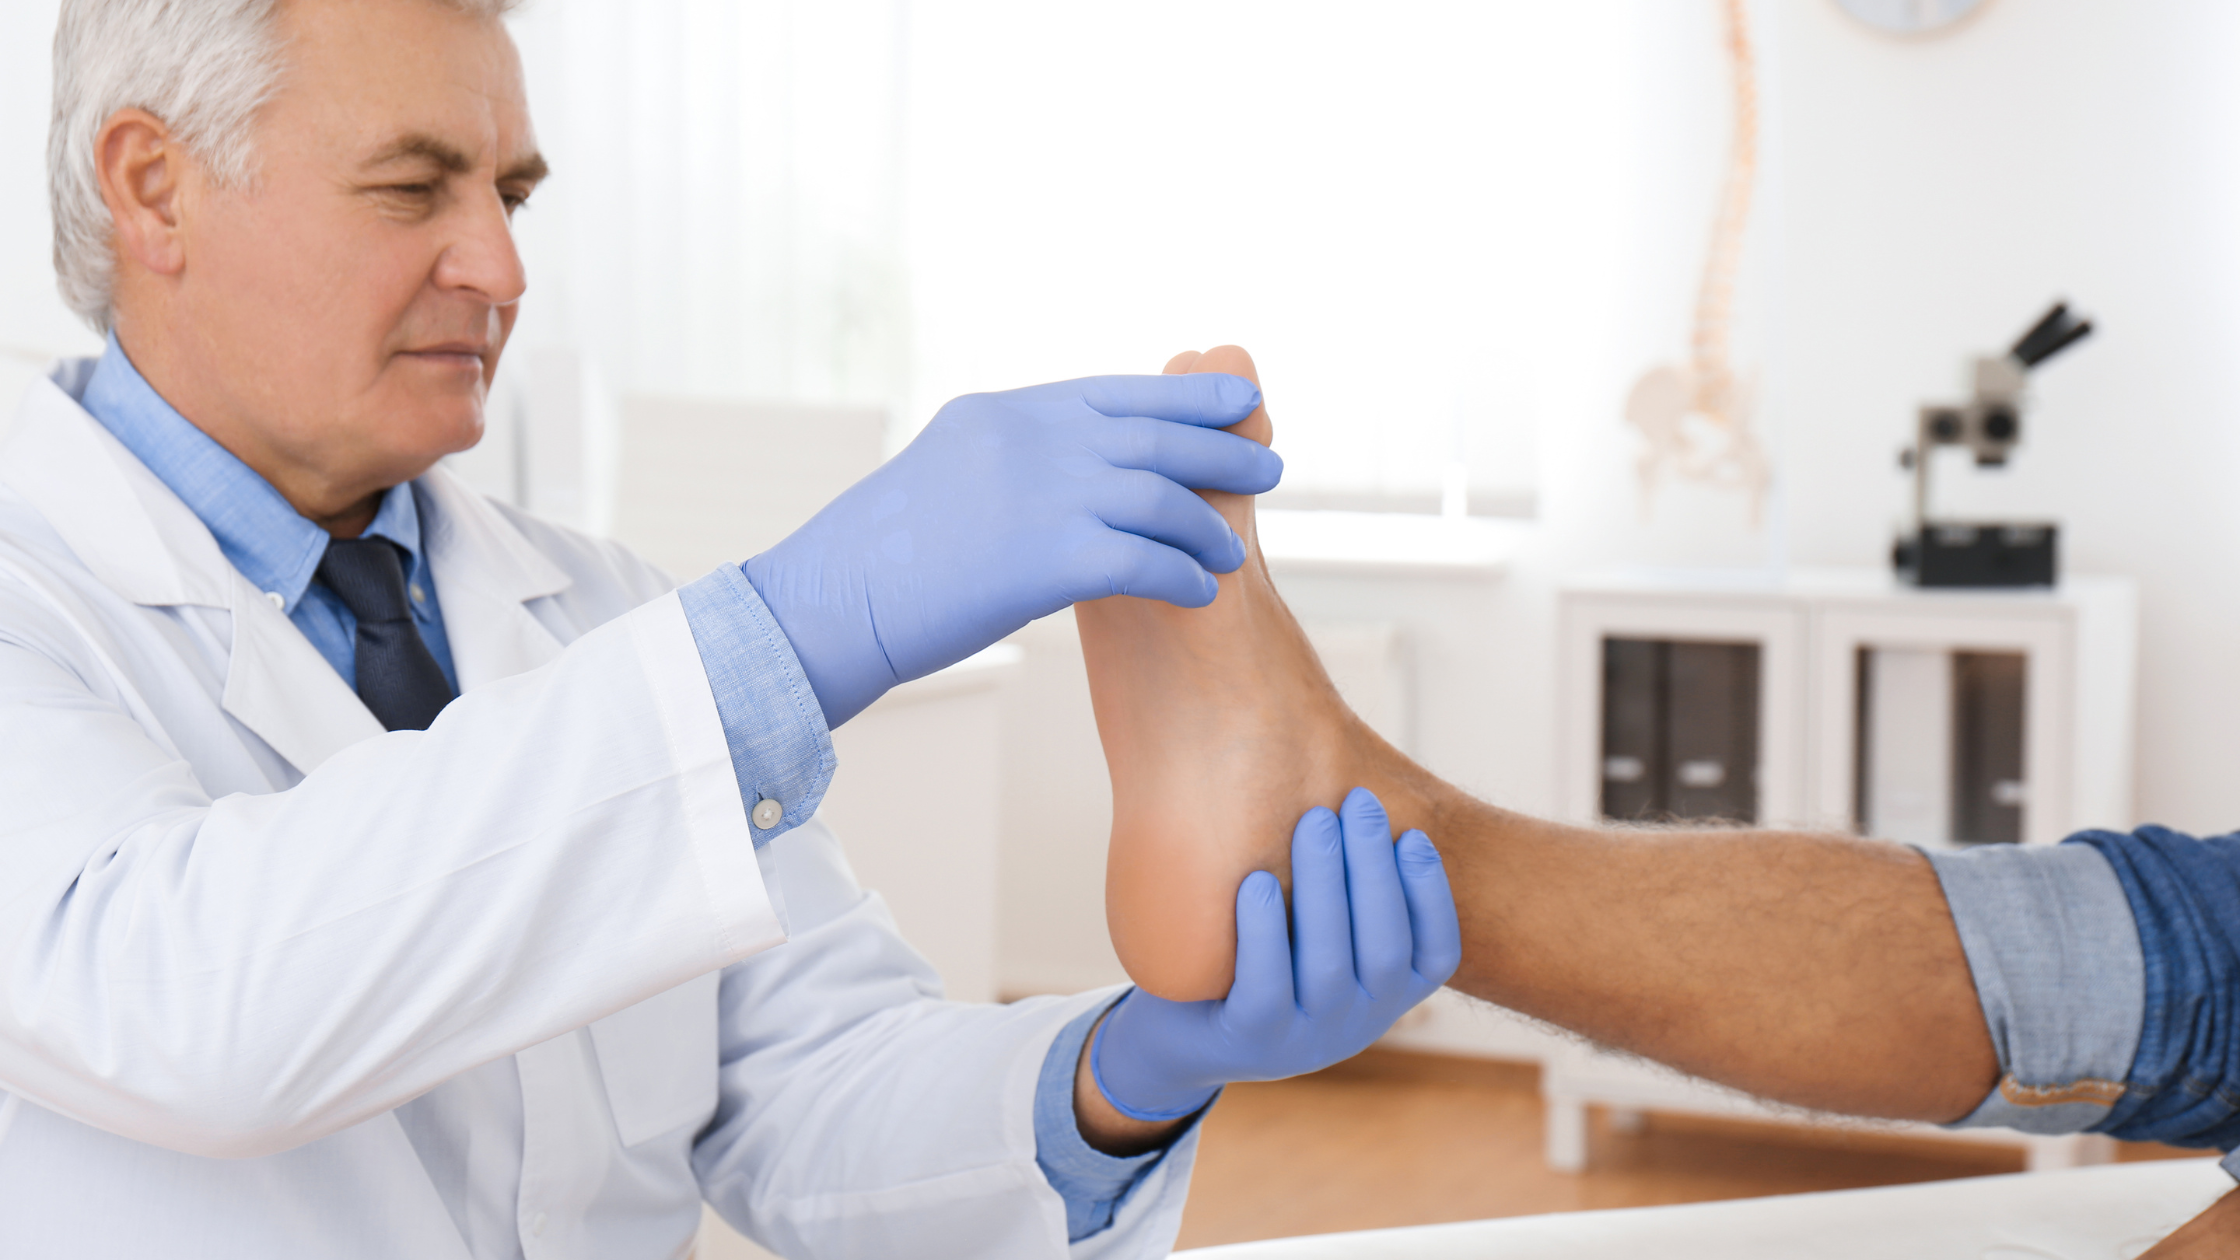 finding an orthopedic specialist near you